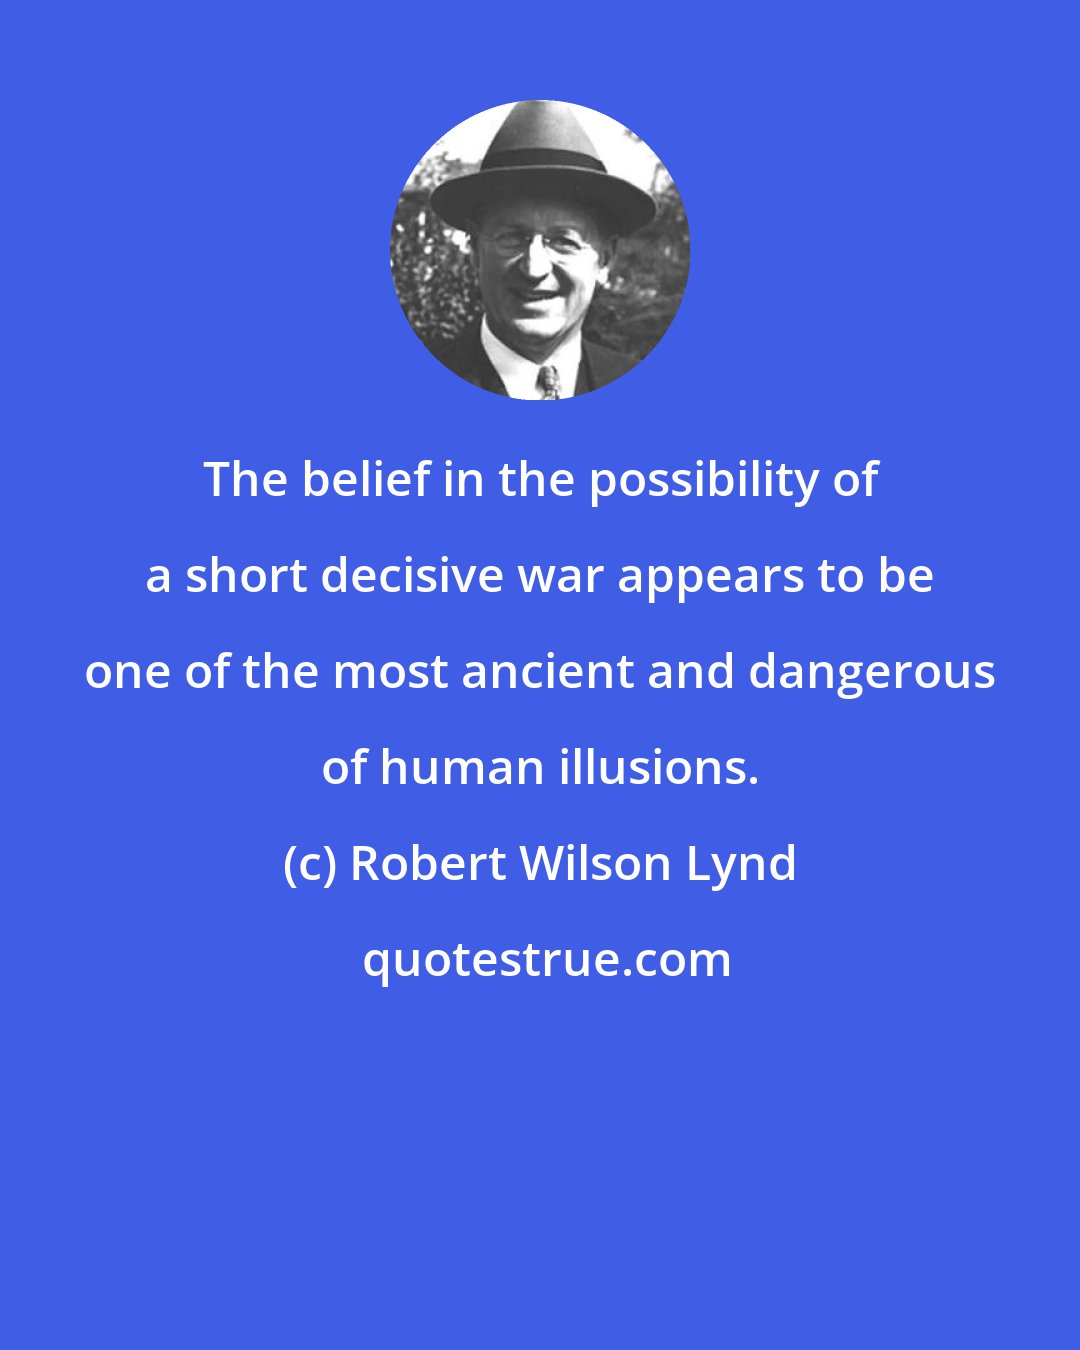 Robert Wilson Lynd: The belief in the possibility of a short decisive war appears to be one of the most ancient and dangerous of human illusions.